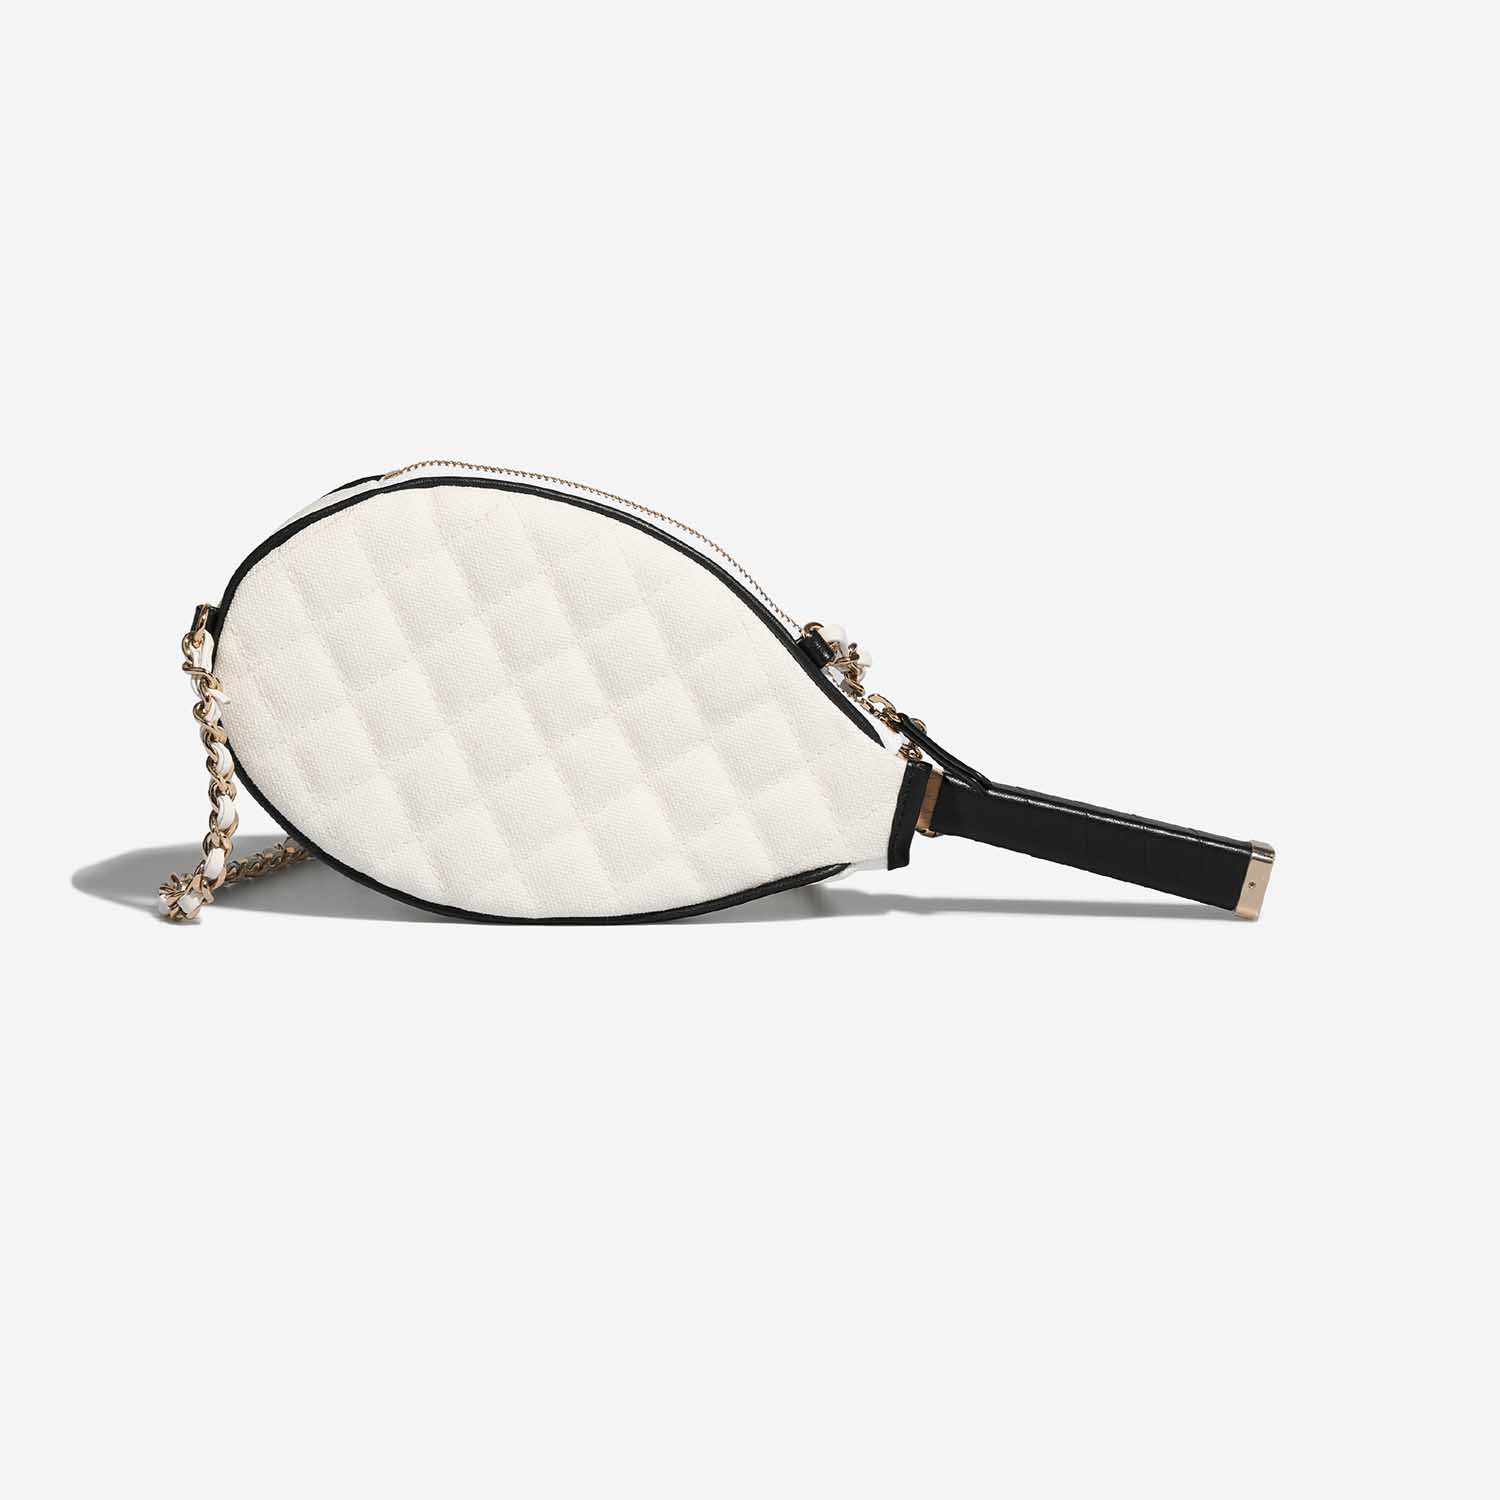 Chanel Clutch Cotton White | Sell your designer bag